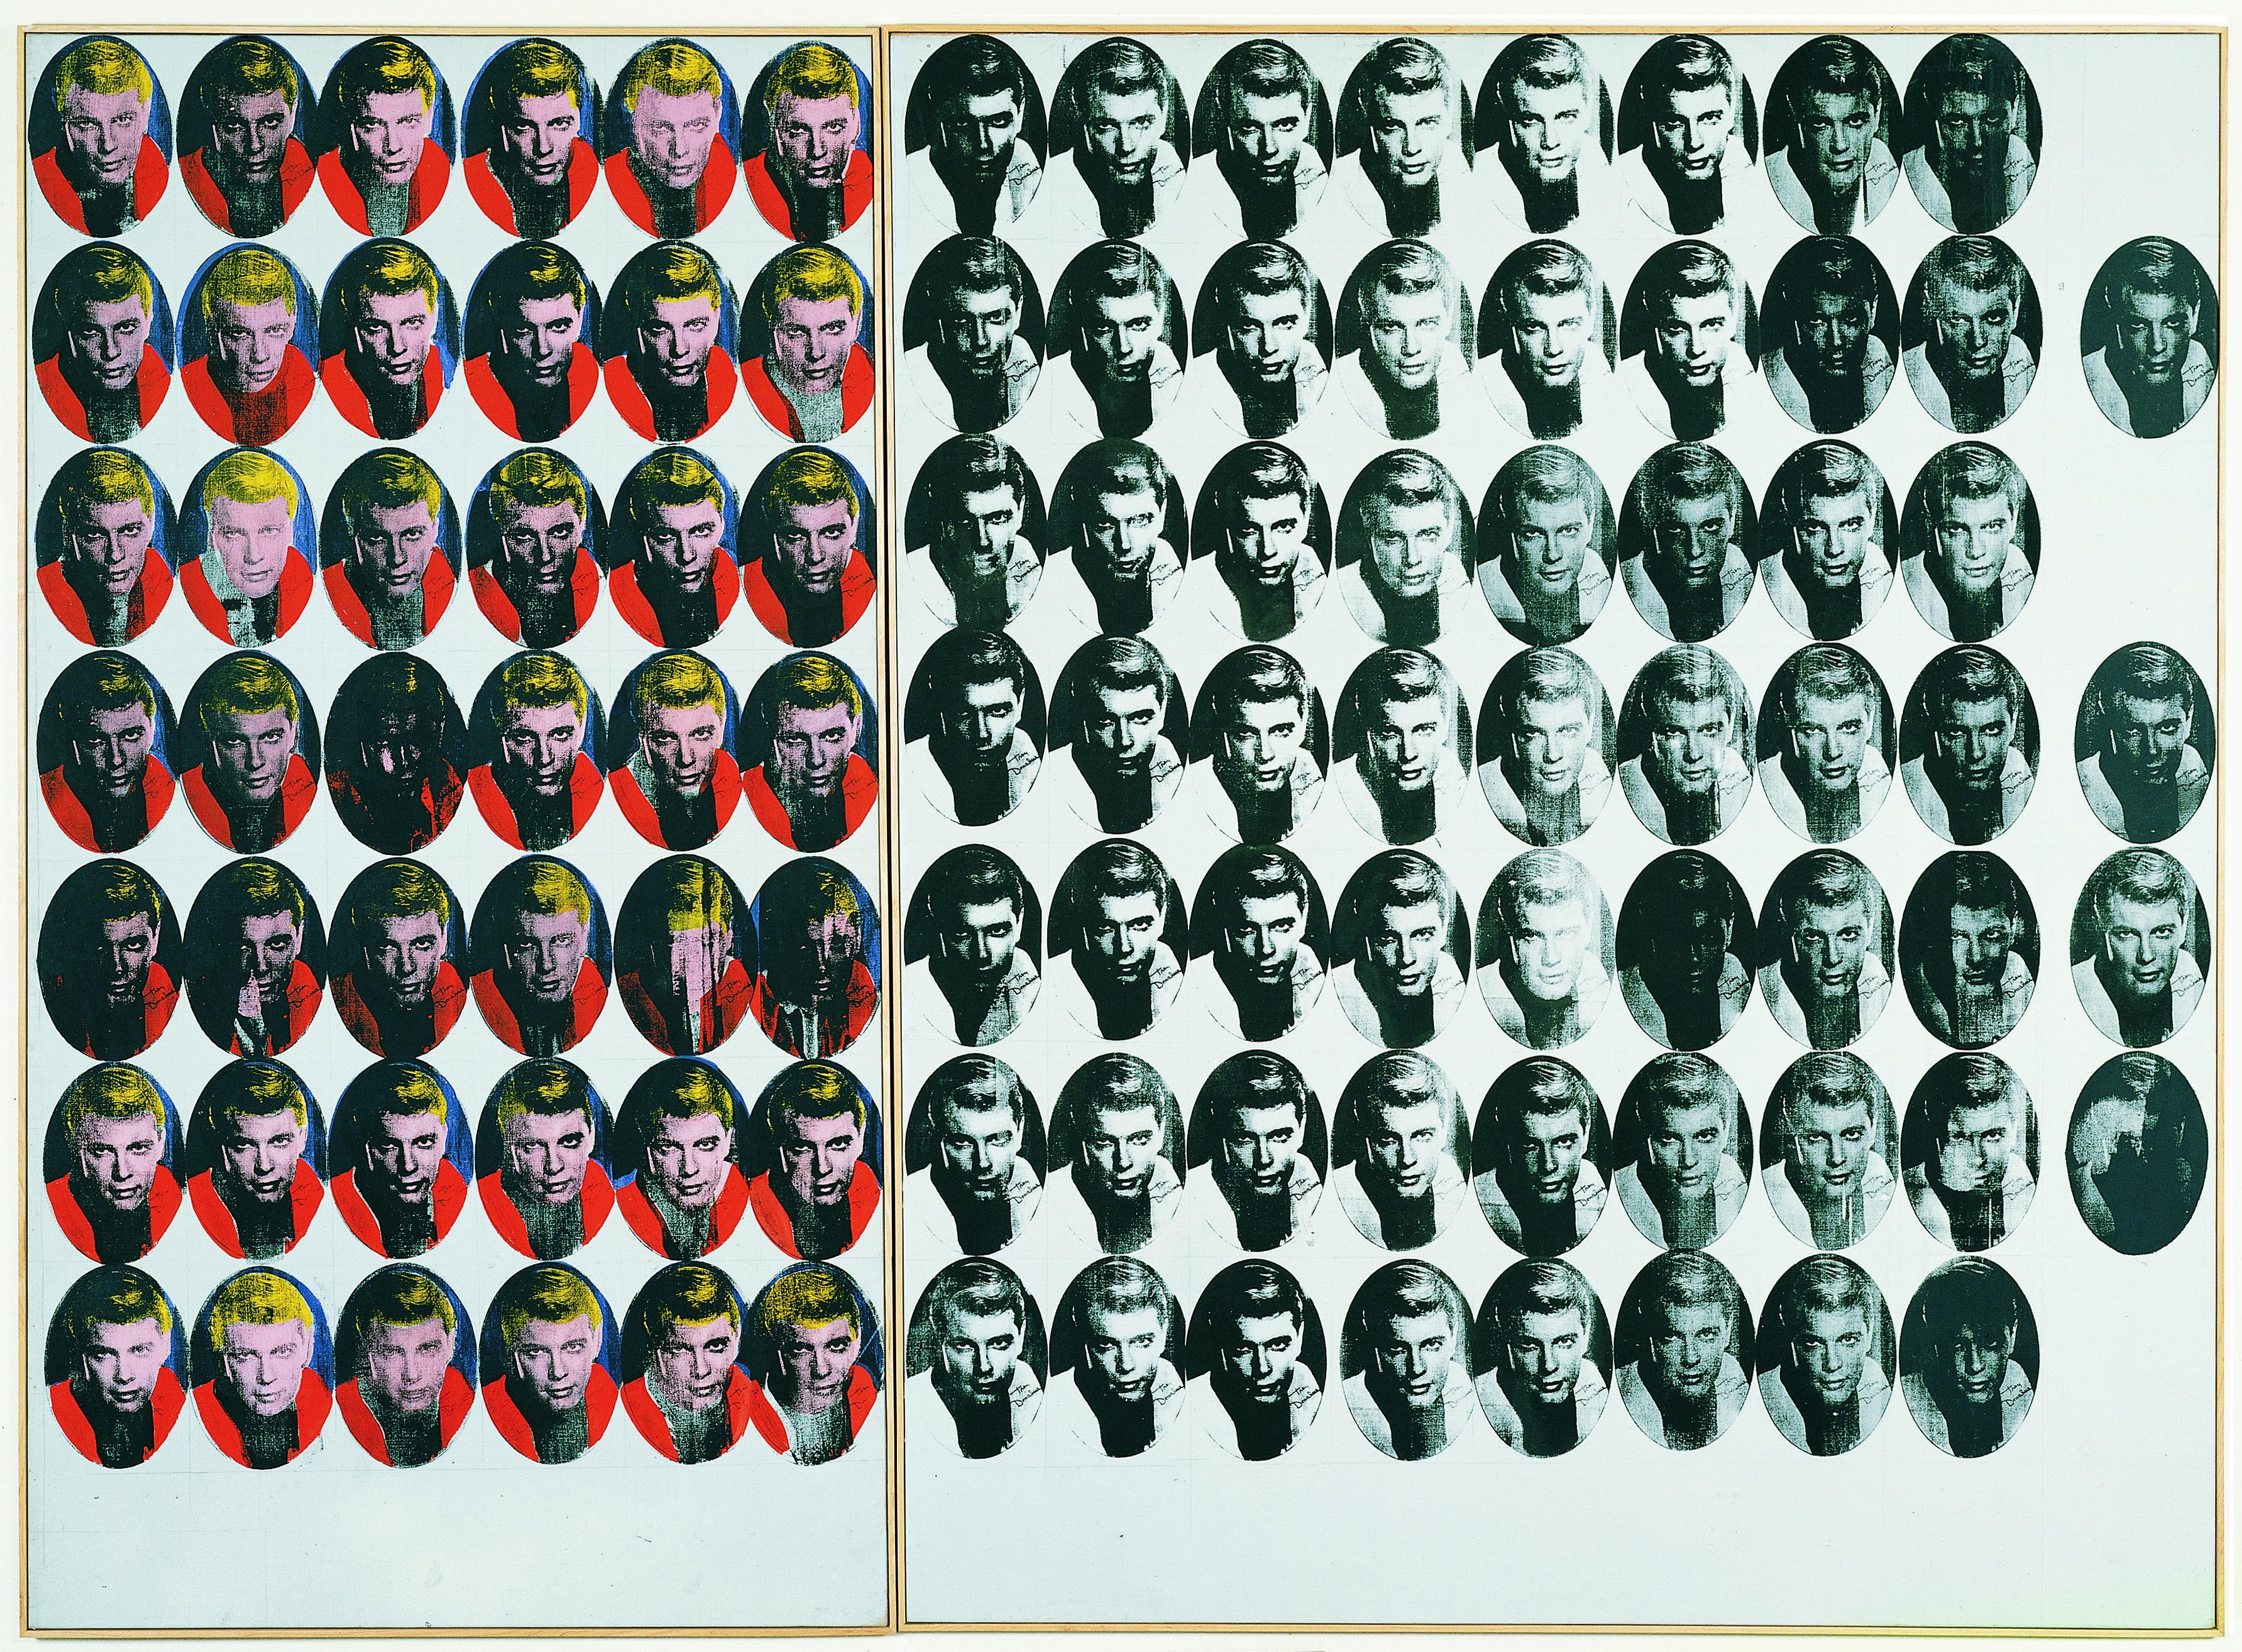 A oval-shaped portrait of a man is repeated in seven rows. The legibility and quality of the portrait varies, and on the left of the painting it appears in bright pink, red, yellow, and blue; on the right in black and white.